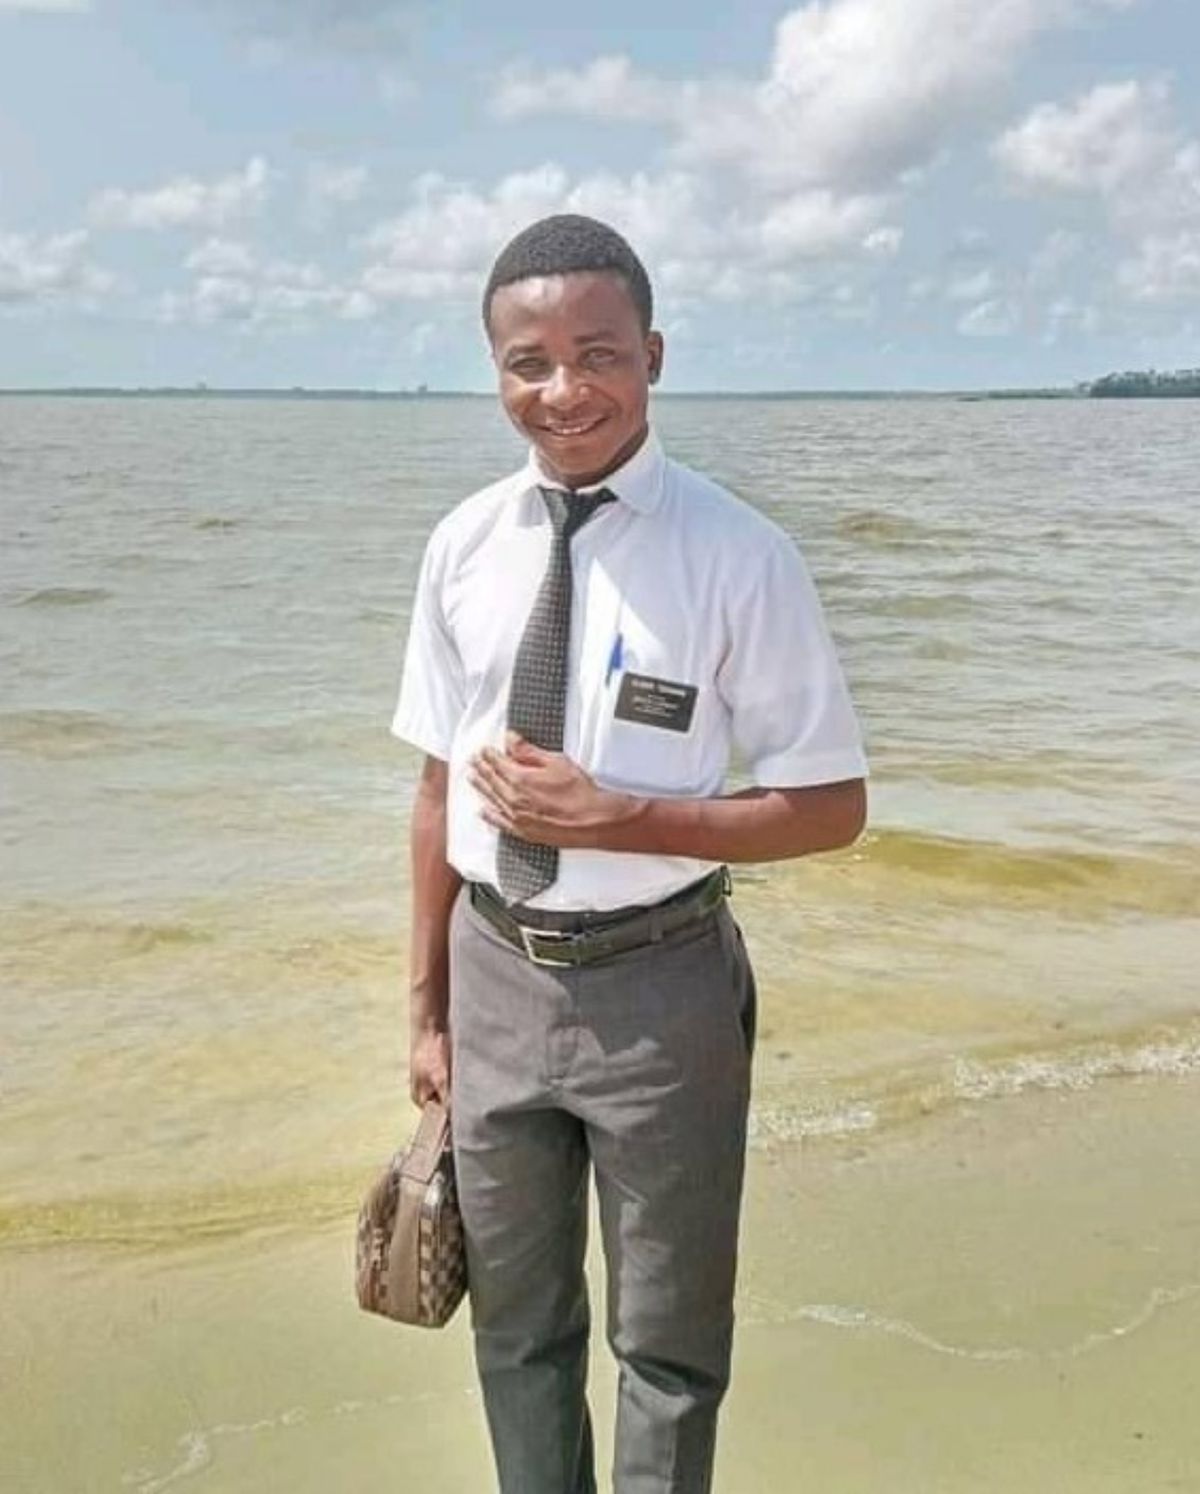 Elder Tshiama Anaclet Tshiama, a 2-year-old Congolese, died while serving a Latter-day Saint mission in the Ivory Coast.